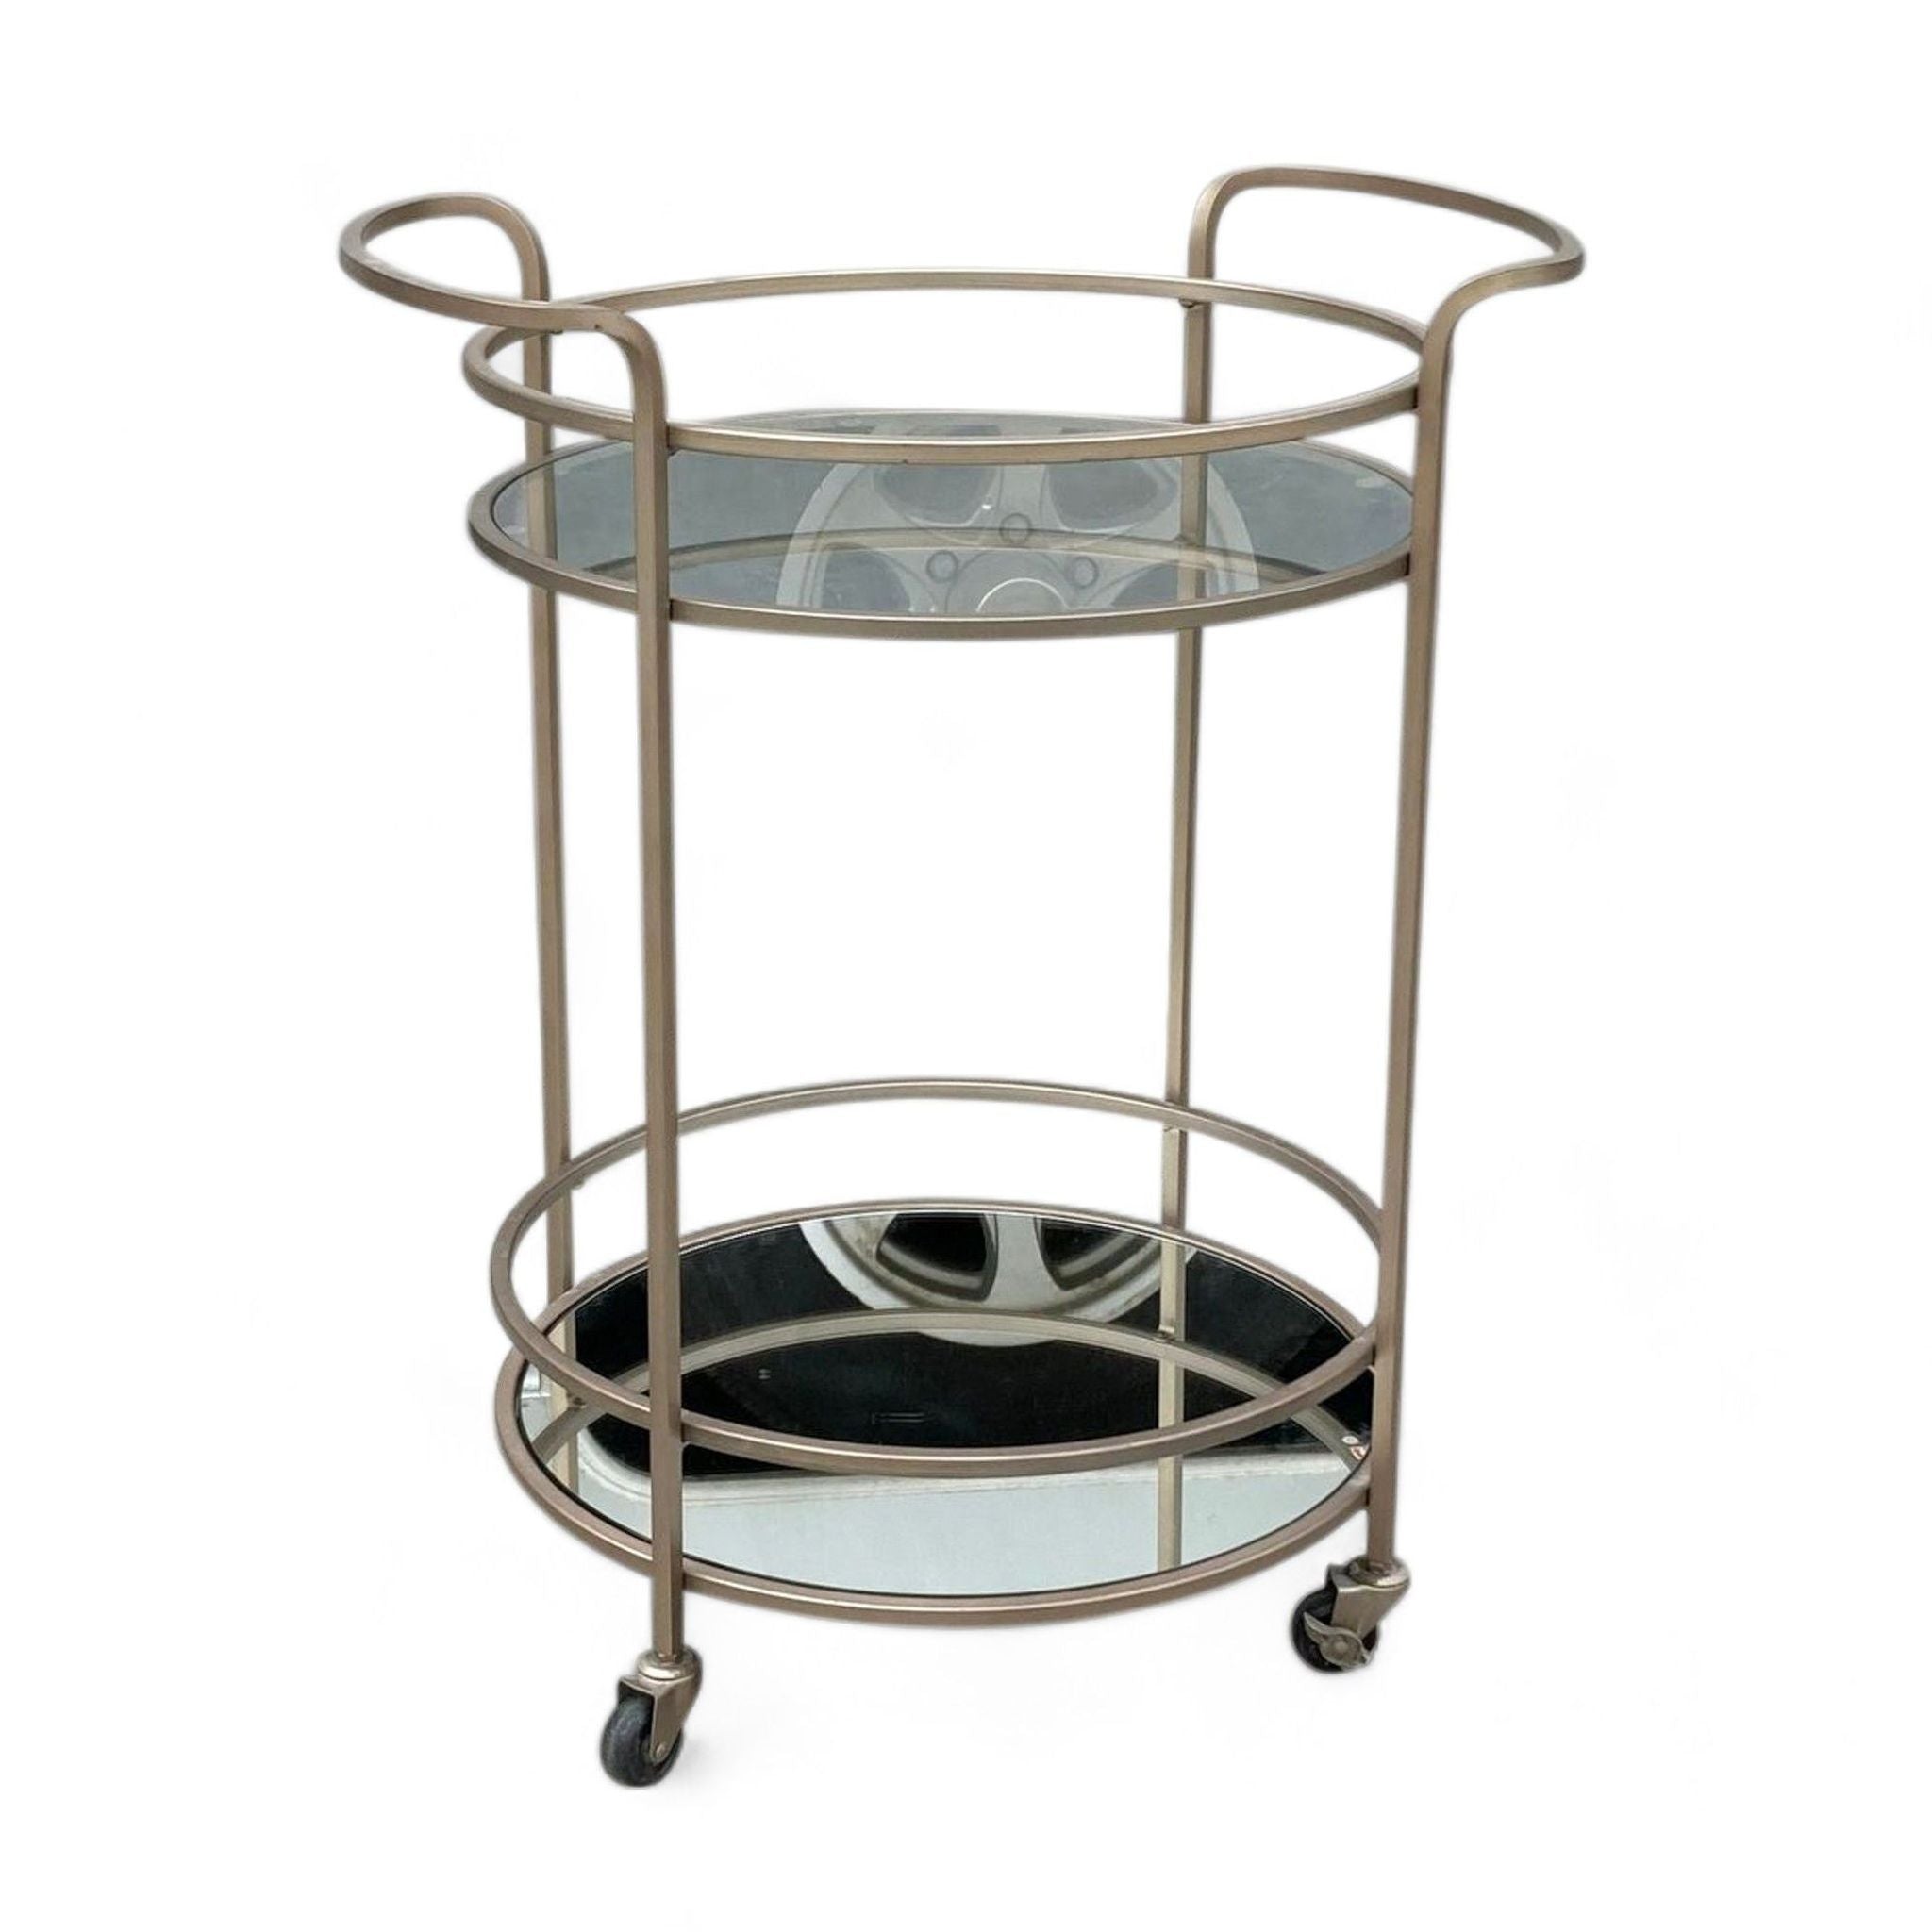 Round Reperch serving cart with smoked glass top and mirrored bottom shelf on casters.